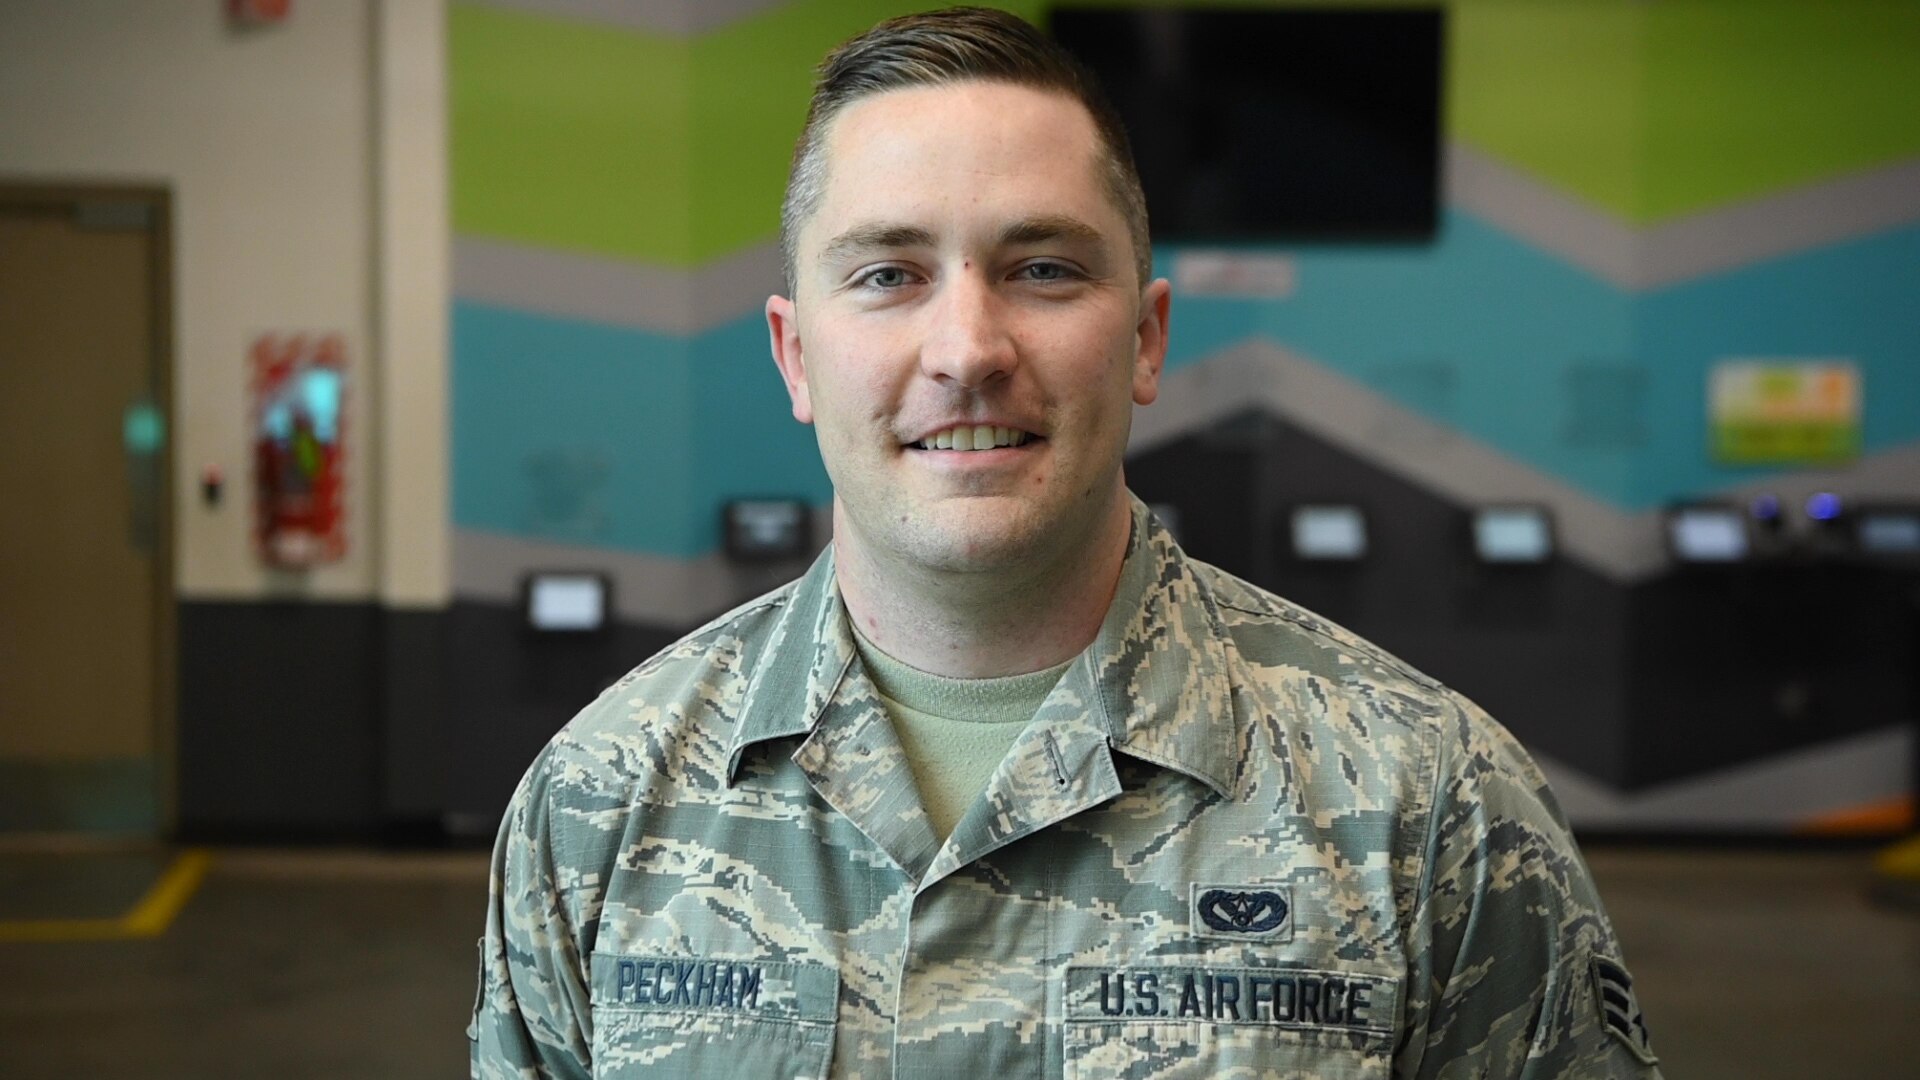 Oklahoma Air National Guard Senior Airman Kaleb Peckham, a water and fuels systems maintainer with the 137th Special Operations Civil Engineering Squadron, poses for a photo at the Regional Food Bank of Oklahoma in Oklahoma City, April 24, 2020. He worked for weeks at the Food Bank before transitioning to other needed tasks within Oklahoma during the state's whole-of-government response to COVID-19. (Oklahoma Air National Guard photo by Staff Sgt. Jordan Martin)